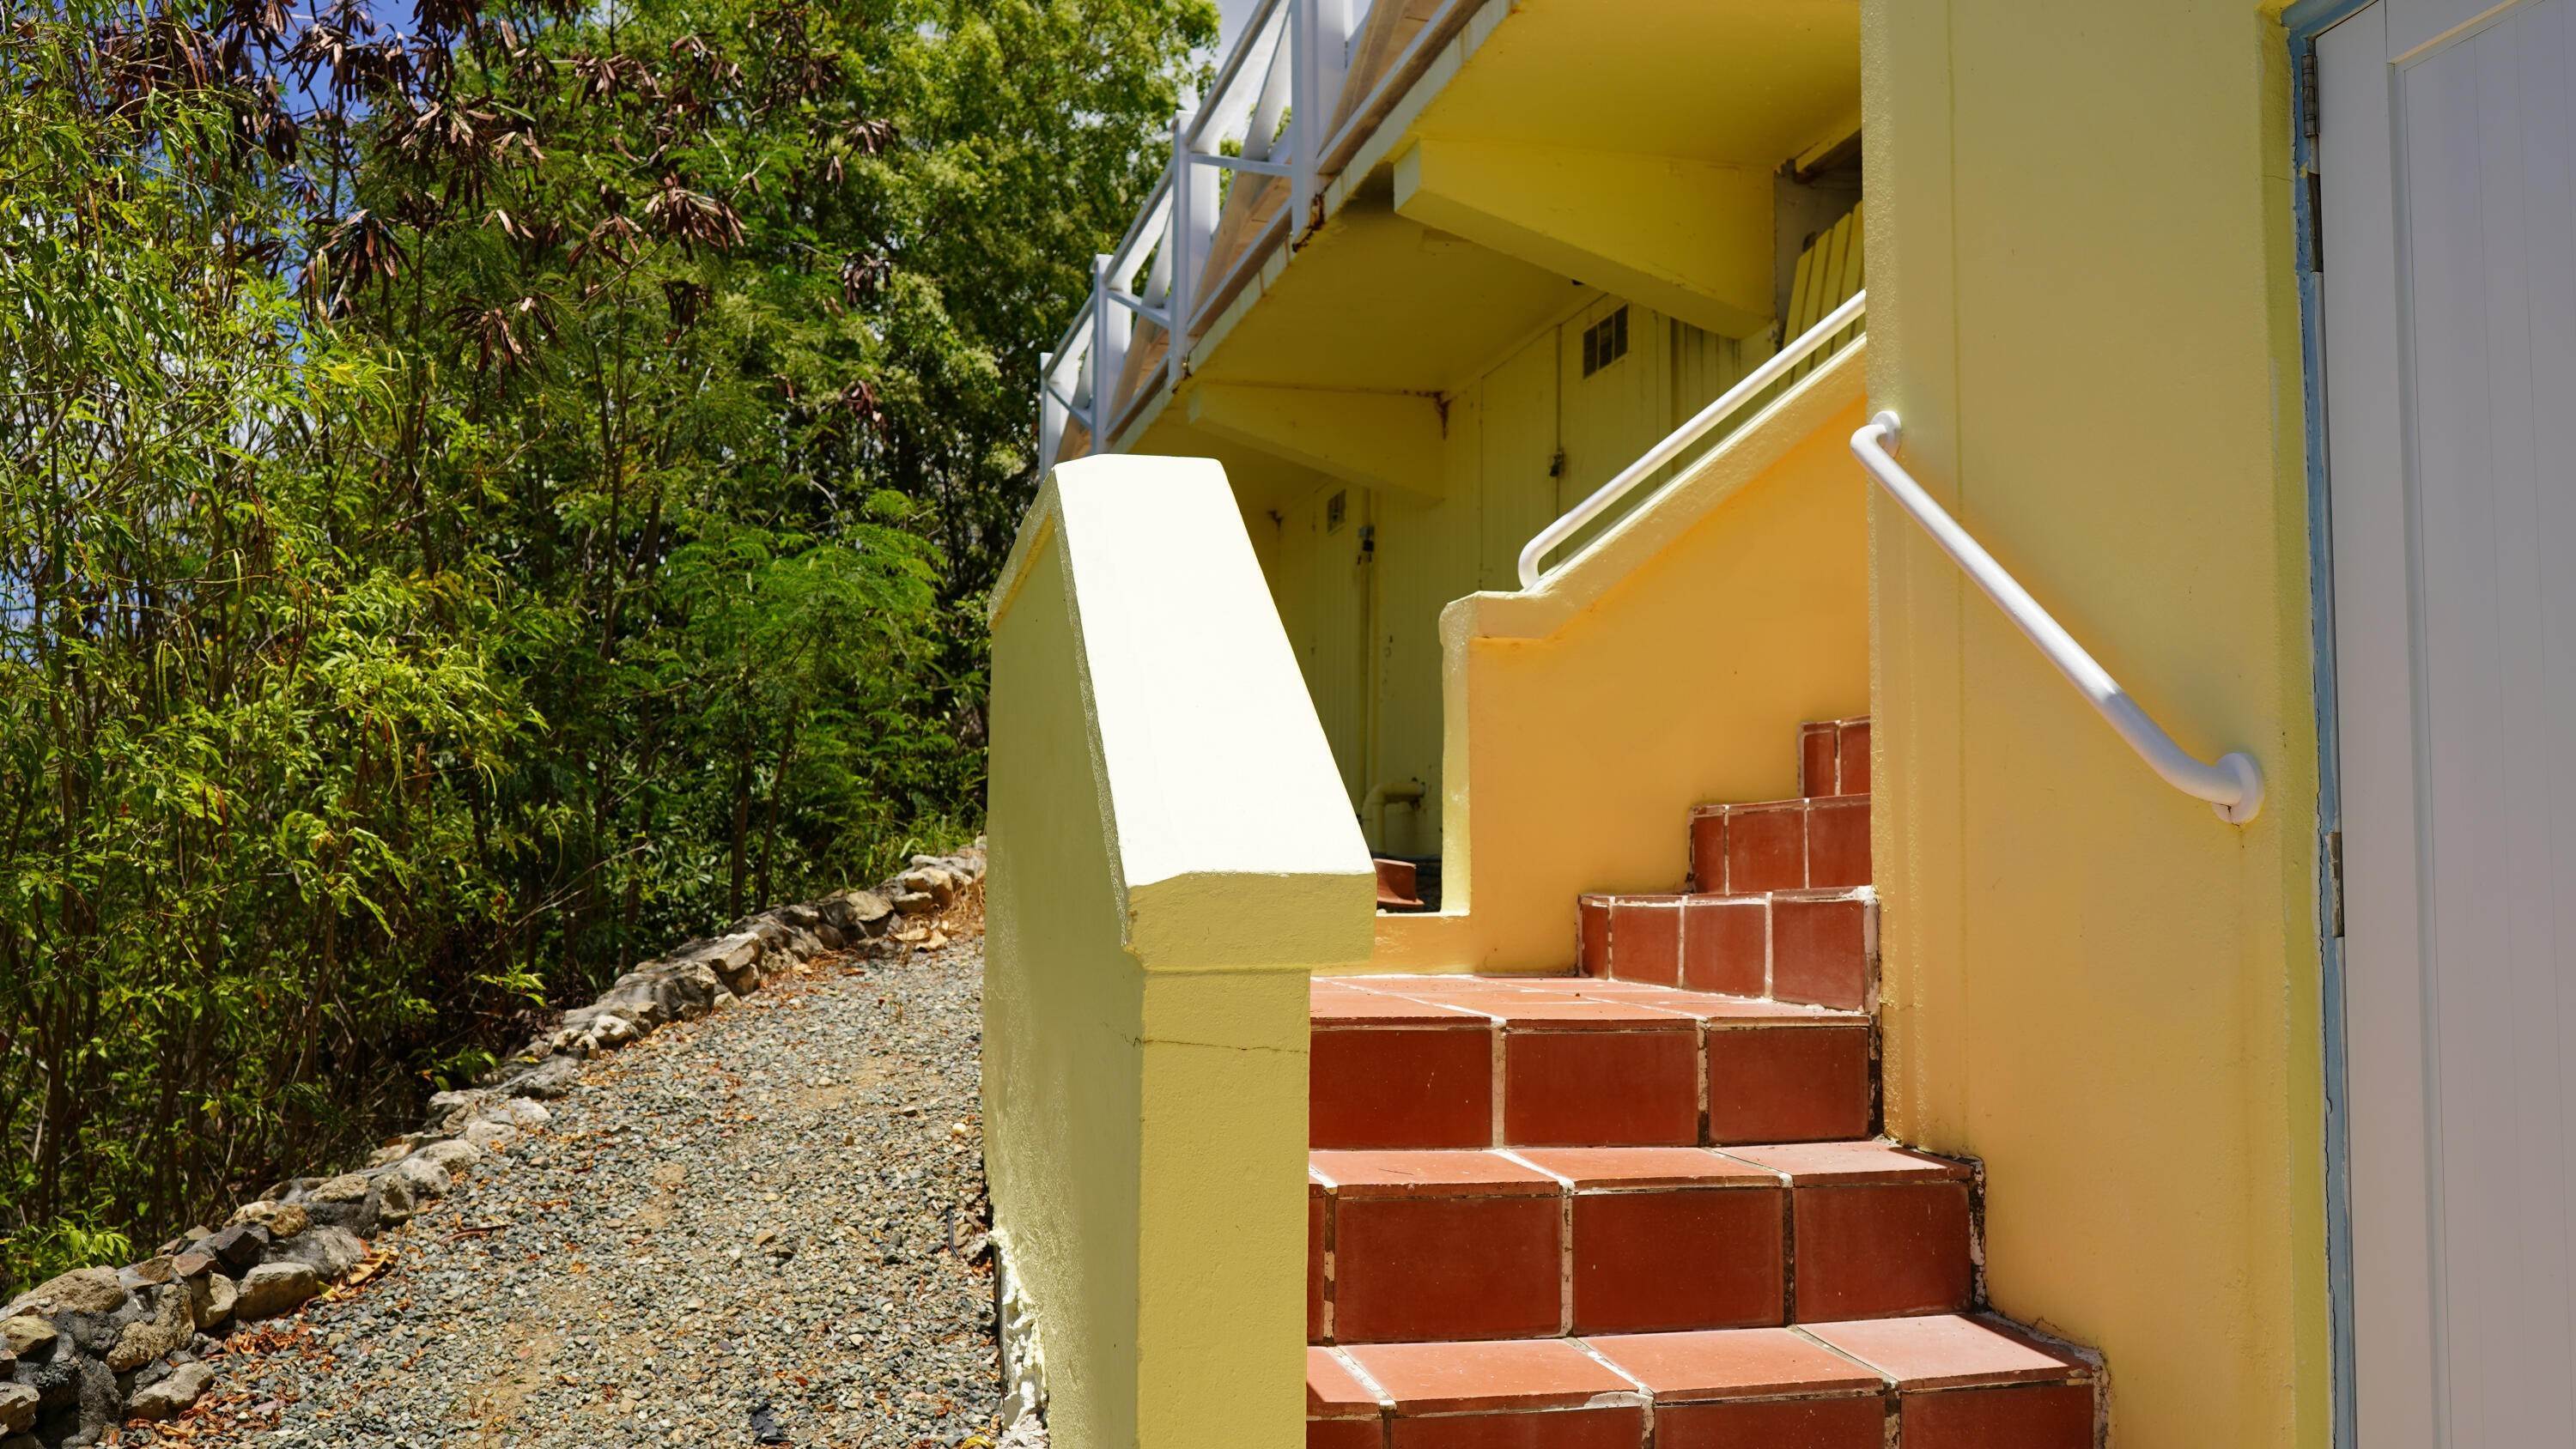 40. Single Family Homes for Sale at 5D Teagues Bay EB St Croix, Virgin Islands 00820 United States Virgin Islands